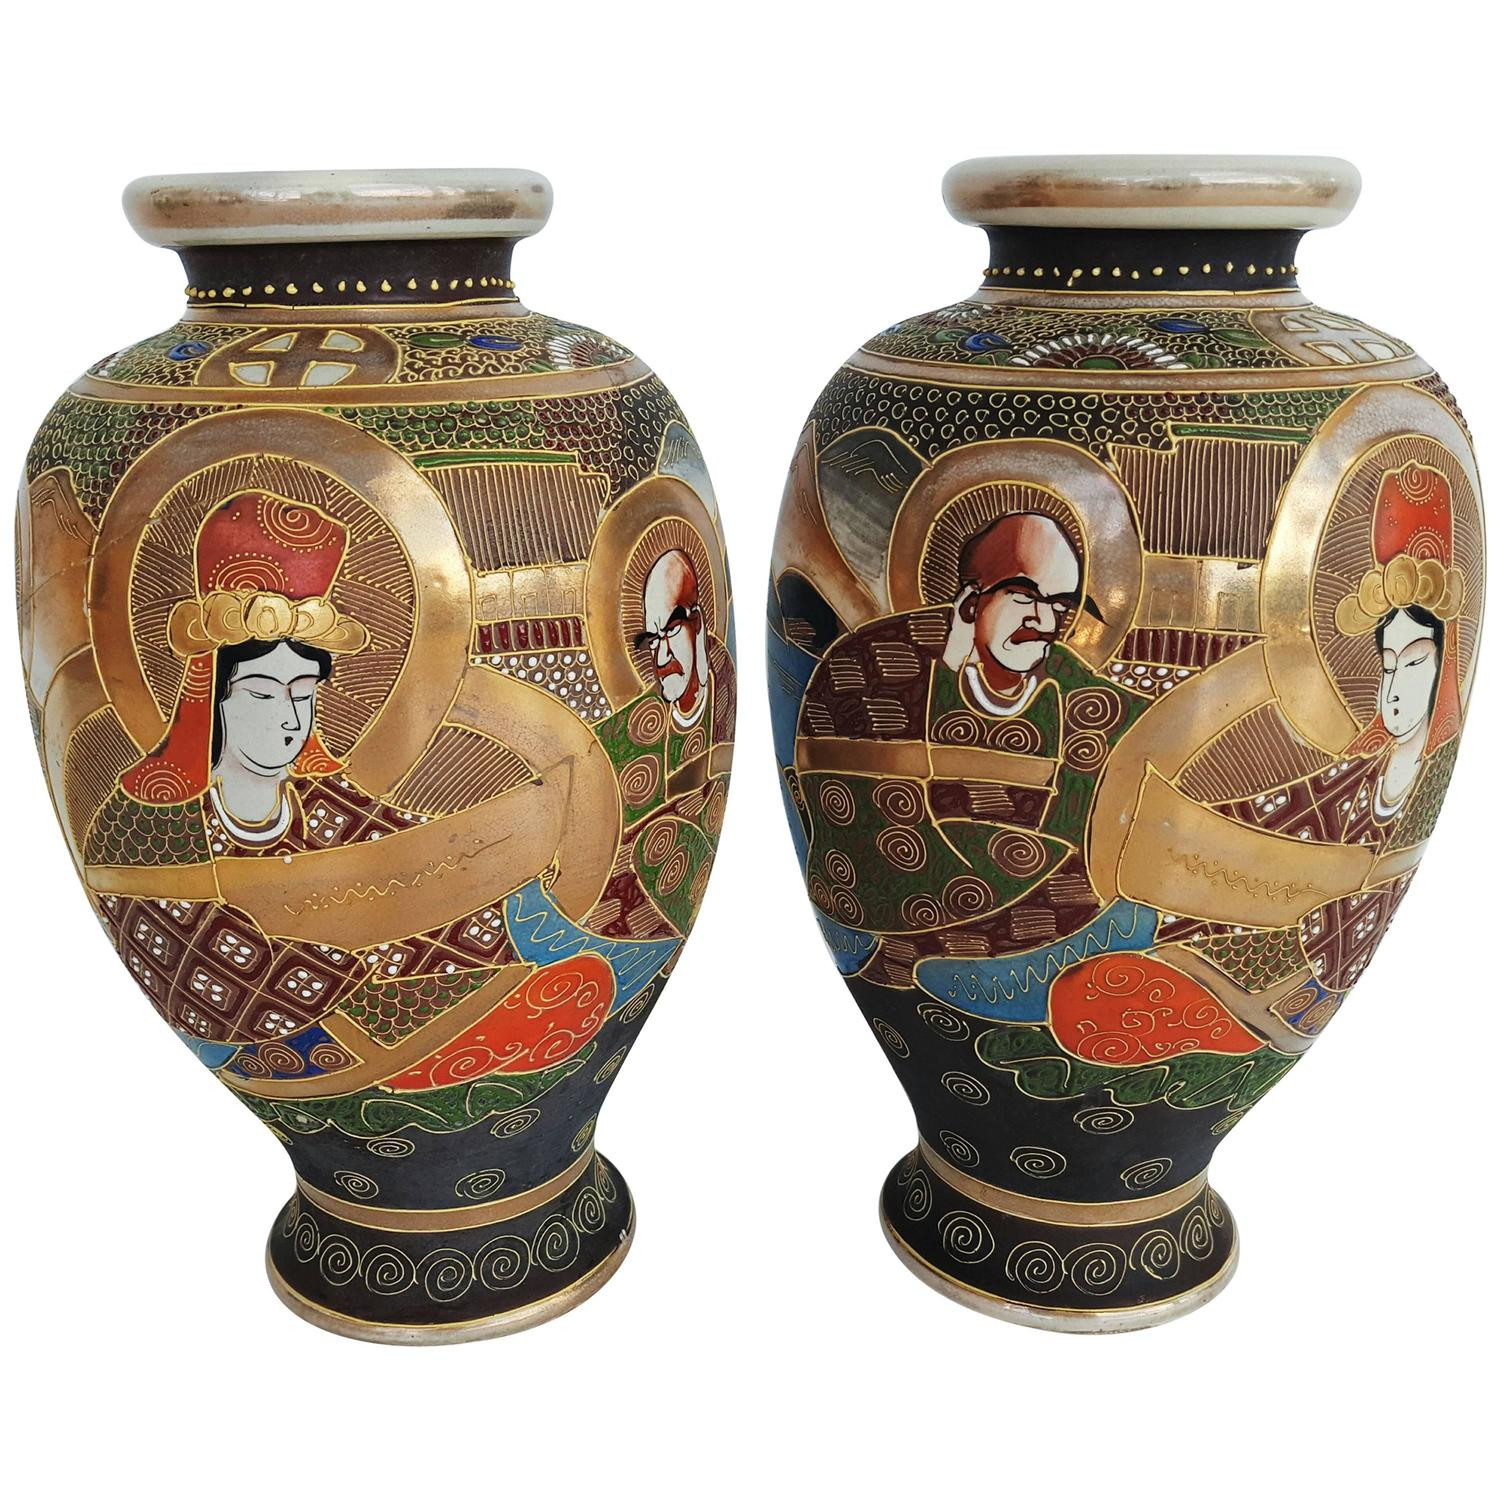 29 Lovely Hand Painted Japanese Vase 2024 free download hand painted japanese vase of early 20th century pair of japanese satsuma vases in painted ceramic throughout early 20th century pair of japanese satsuma vases in painted ceramic for sale at